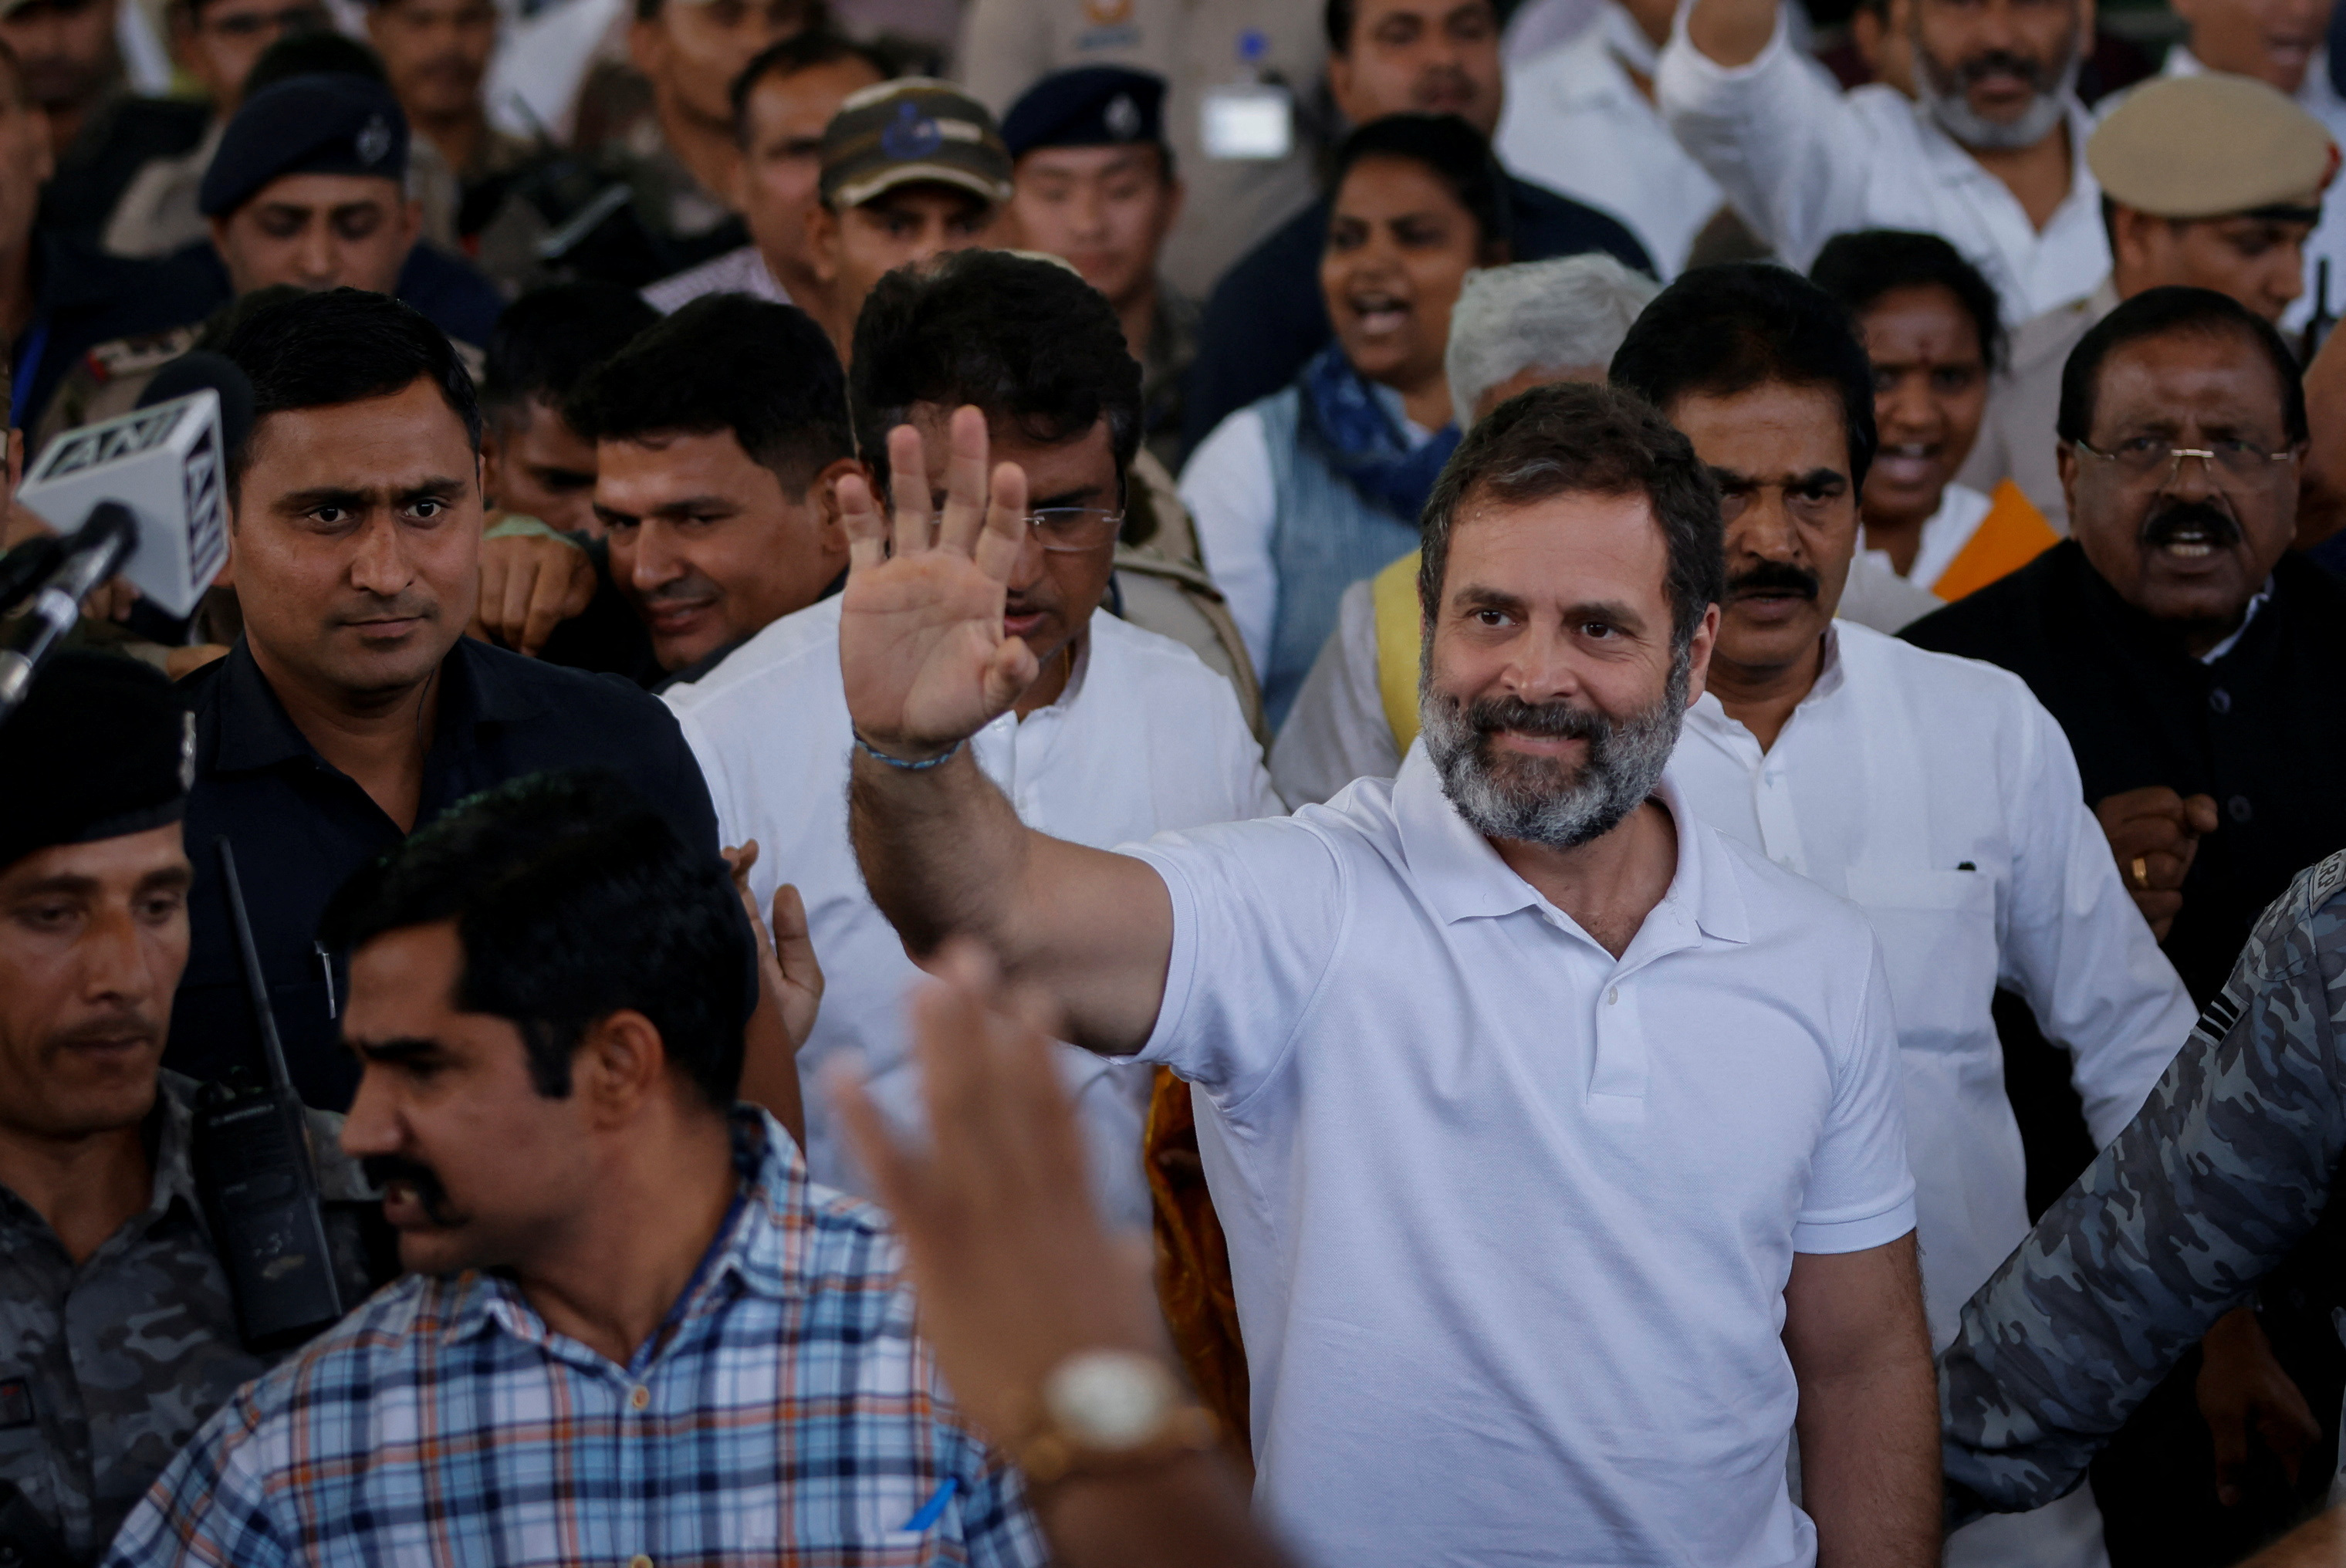 Rahul Gandhi, a senior leader of India's main opposition Congress party, arrives at the New Delhi airport